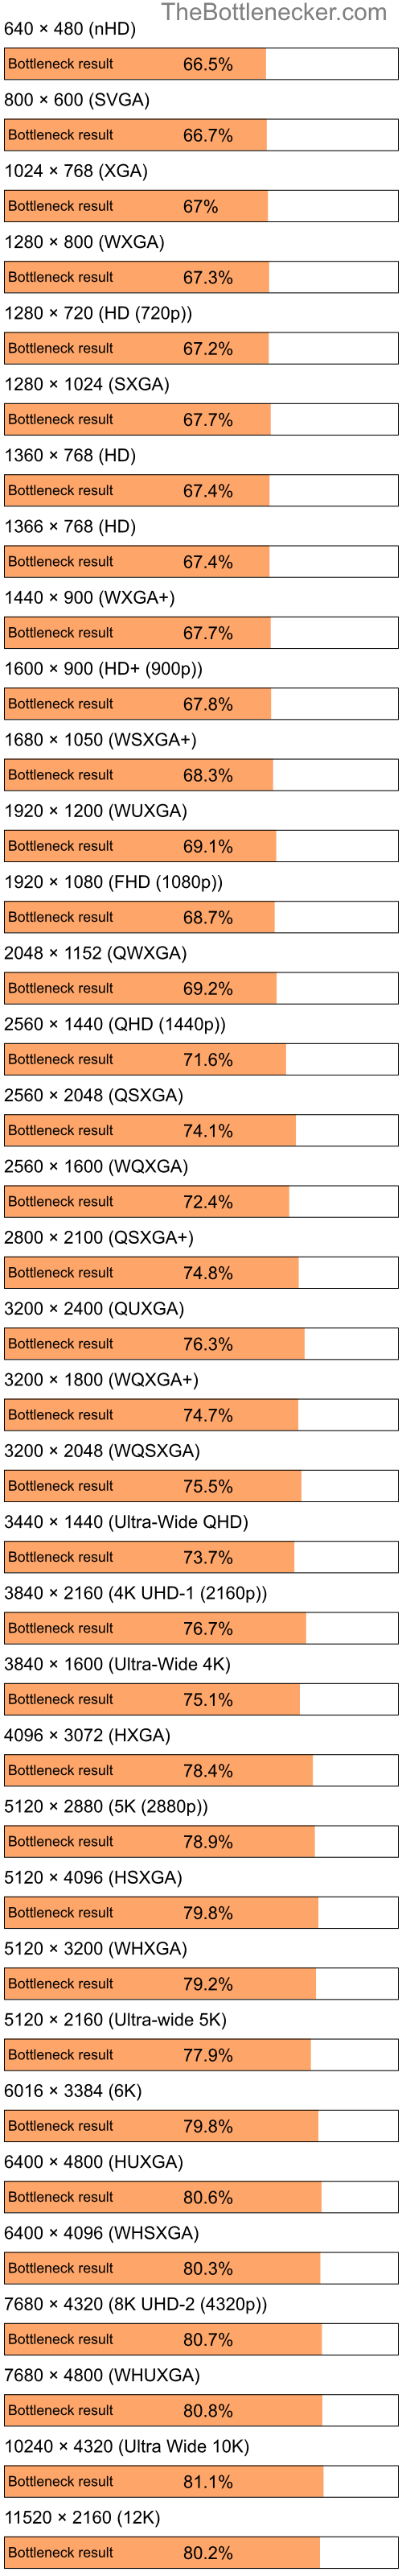 Bottleneck results by resolution for Intel Pentium 4 and AMD Radeon X550 in Processor Intense Tasks